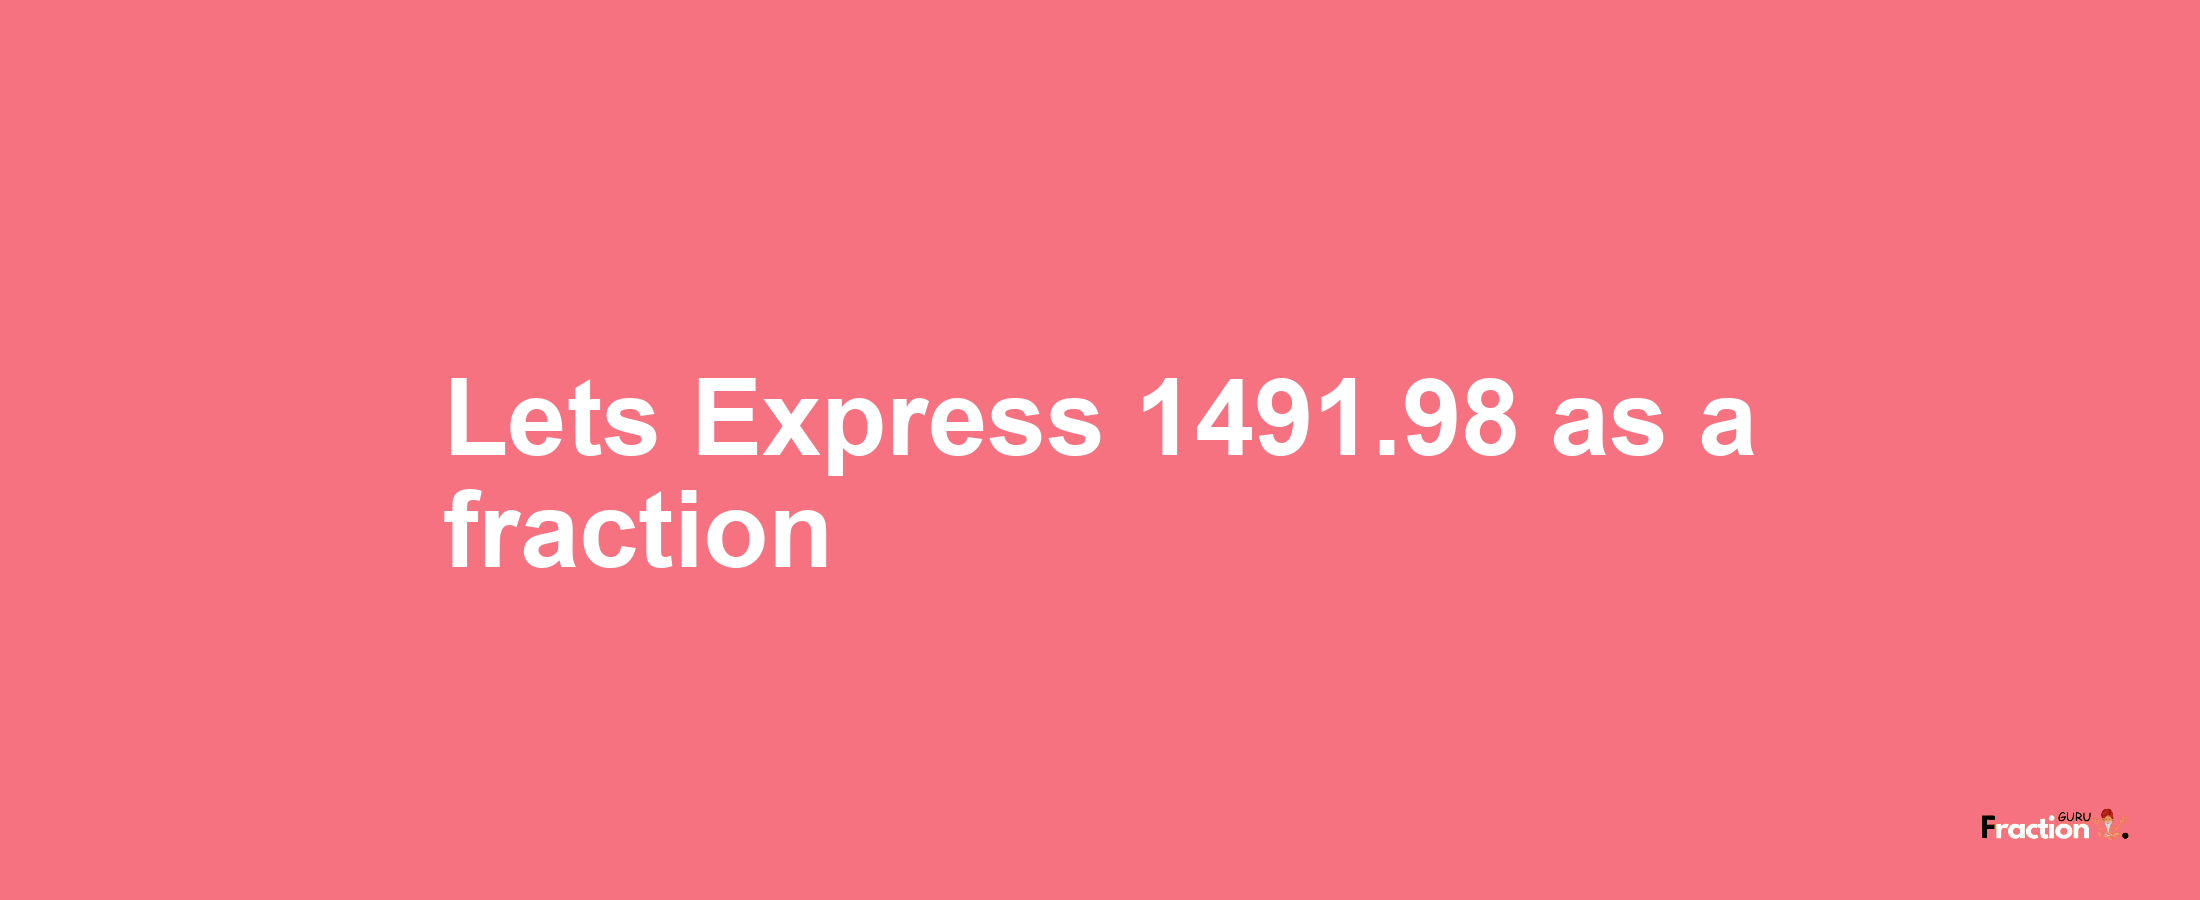 Lets Express 1491.98 as afraction